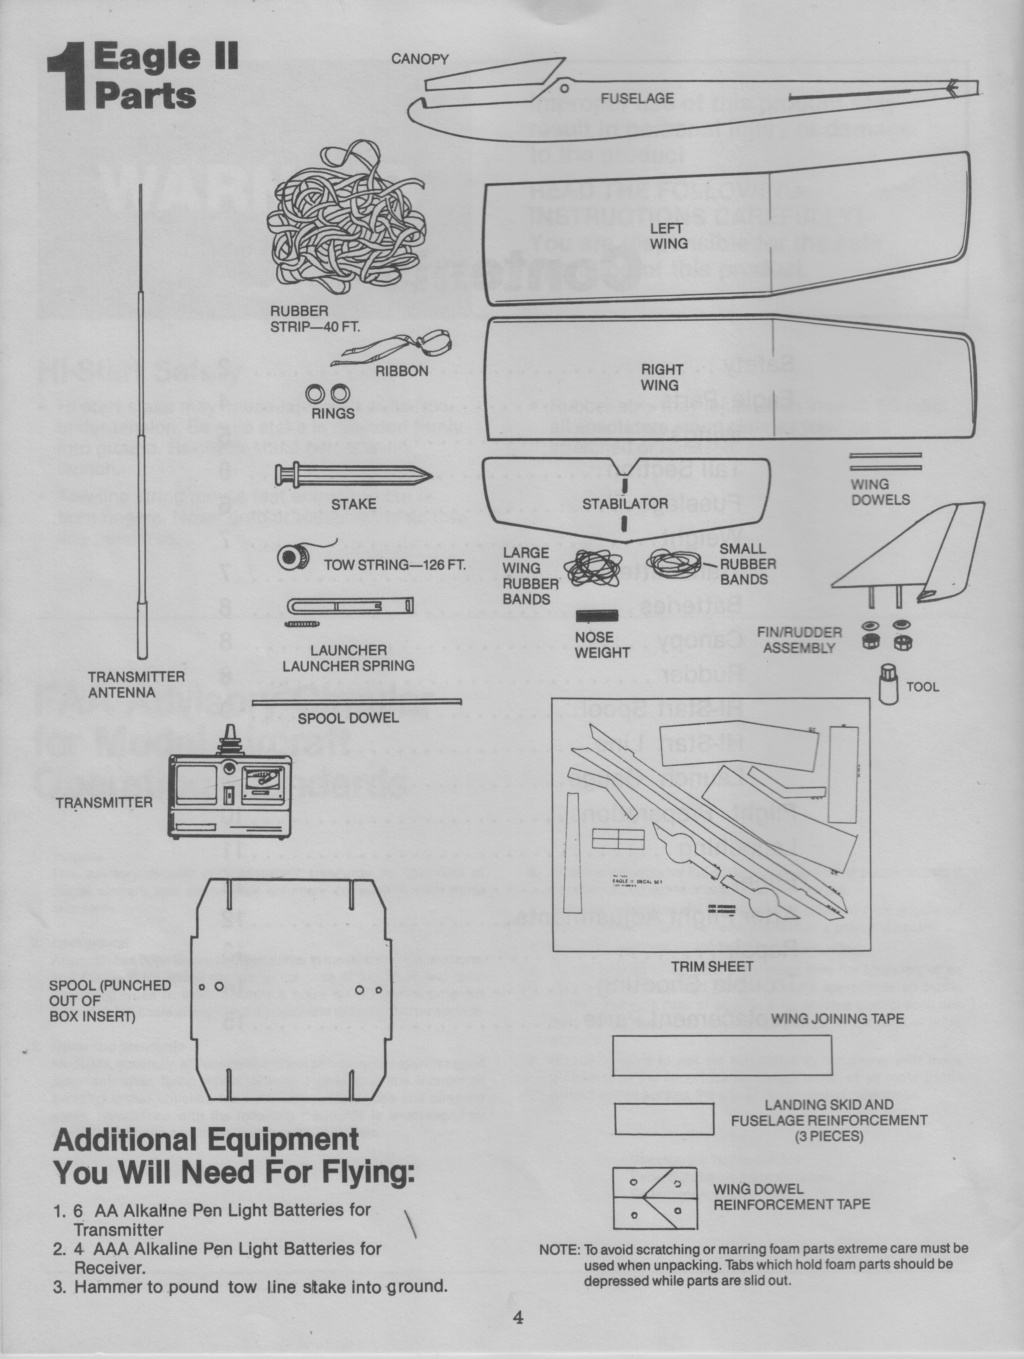 Eagle II pictures and manual scans. Eagle_13